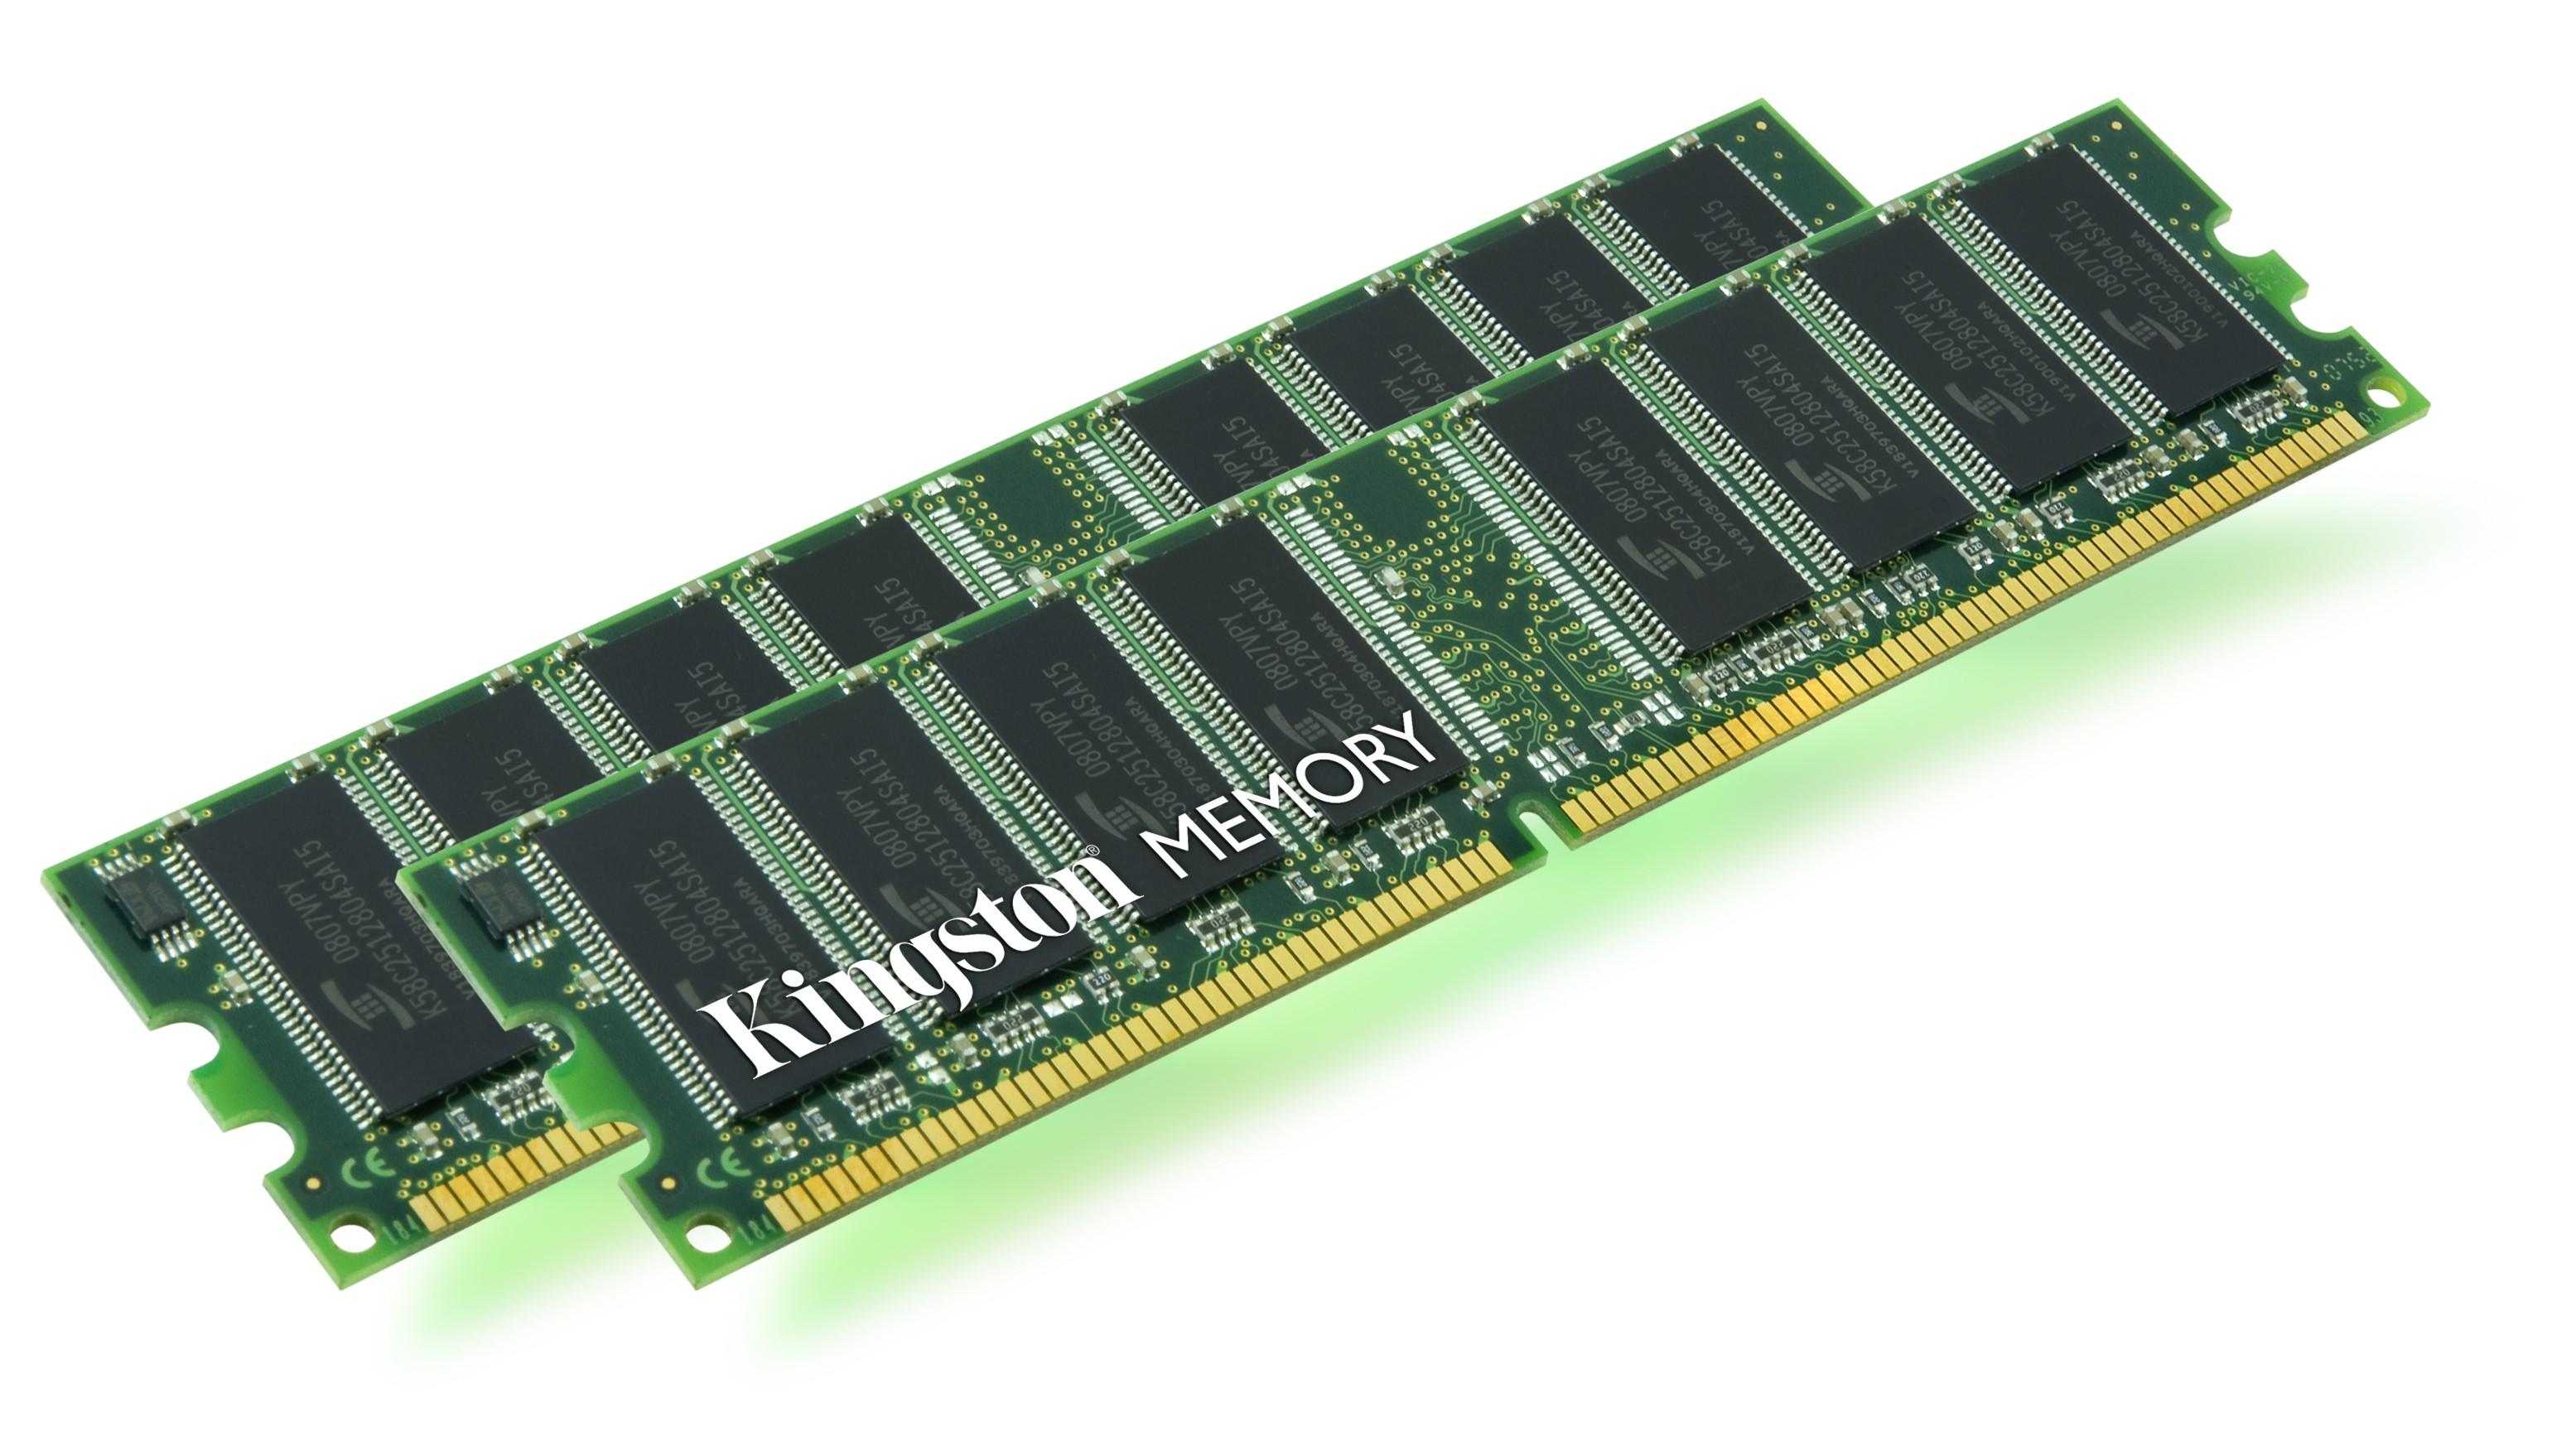 Foto Kingston technology system specific memory 2gb 800mhz cl6 foto 769270